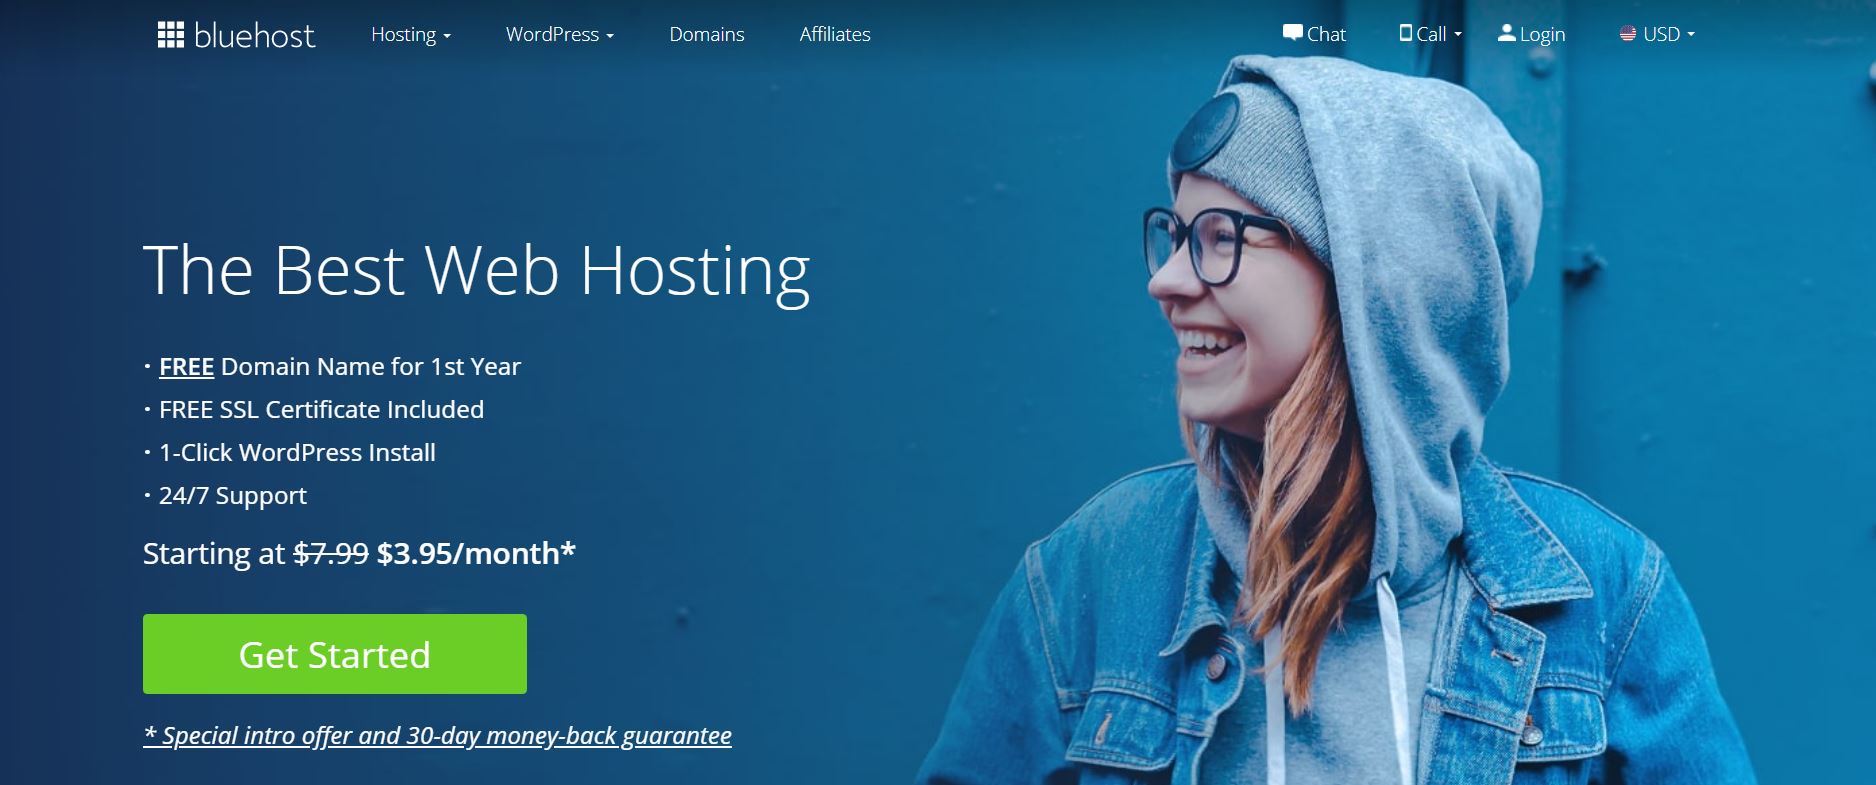 Bluehost review reddit